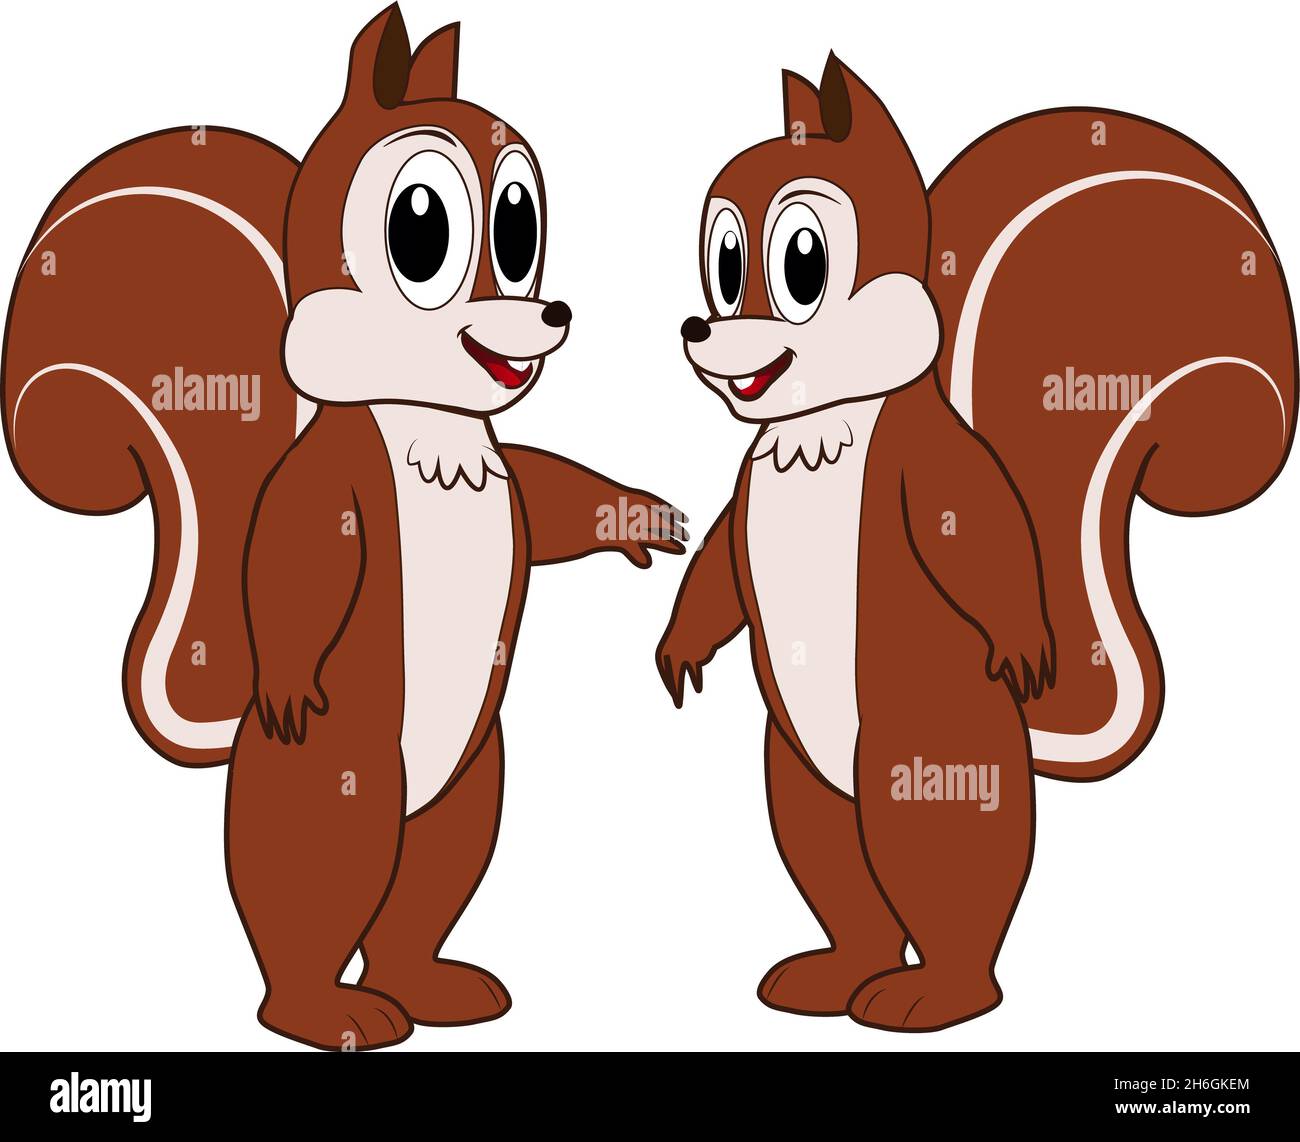 Cartoon of two cute friendly squirrels Stock Photo